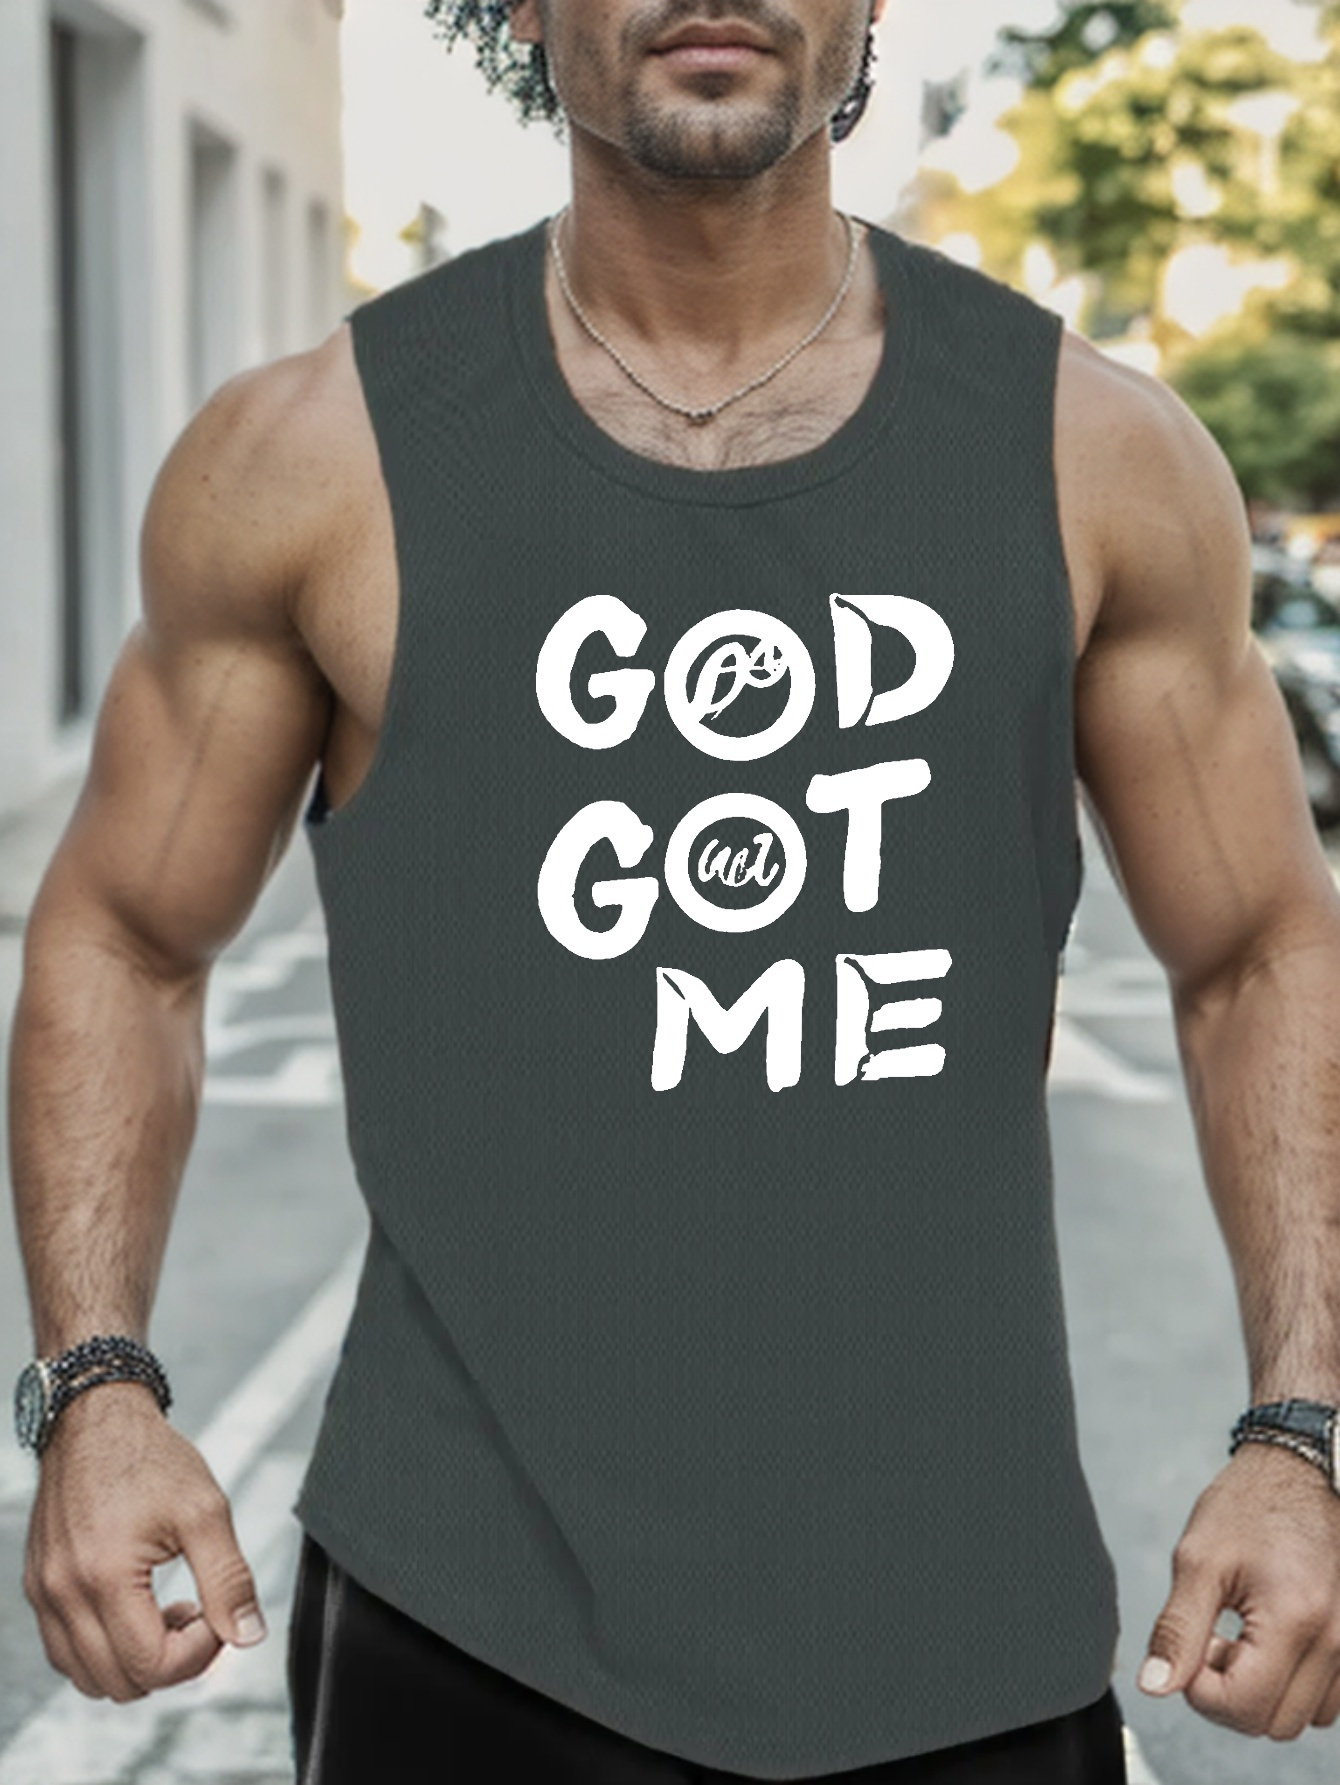 Men's Solid Tank Tops Summer Clothing Gym Bodybuilding Training Fitness  Sleeveless Muscle T Shirts Slim Fit Workout Vest Tshirt Top